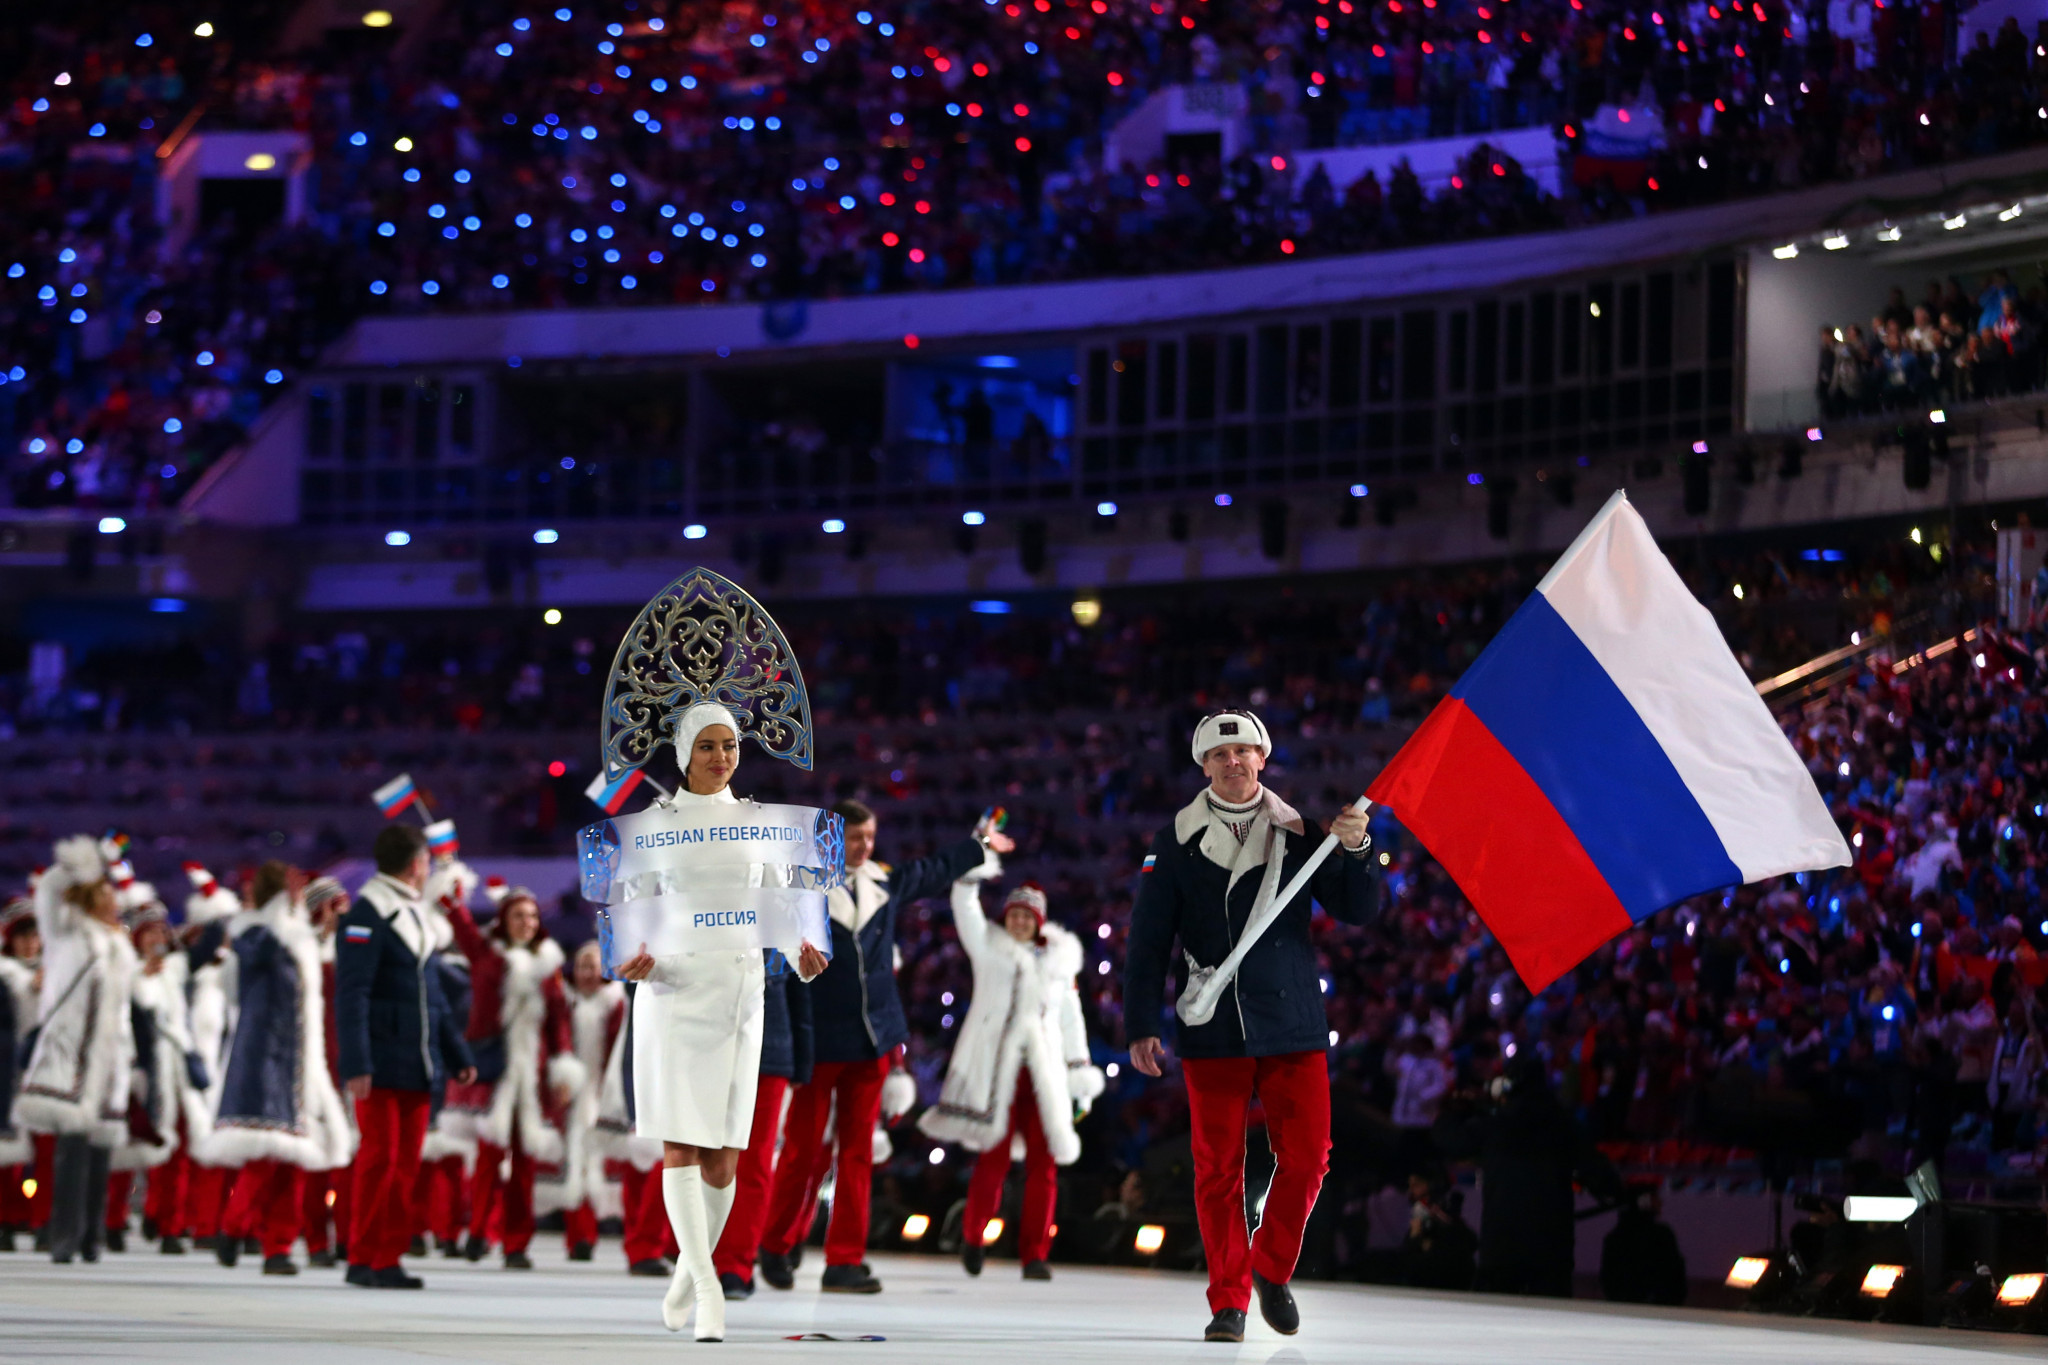 Leading Russian athletes including Sochi 2014 flagbearer Alexander Zubkov are under investigation ©Getty Images